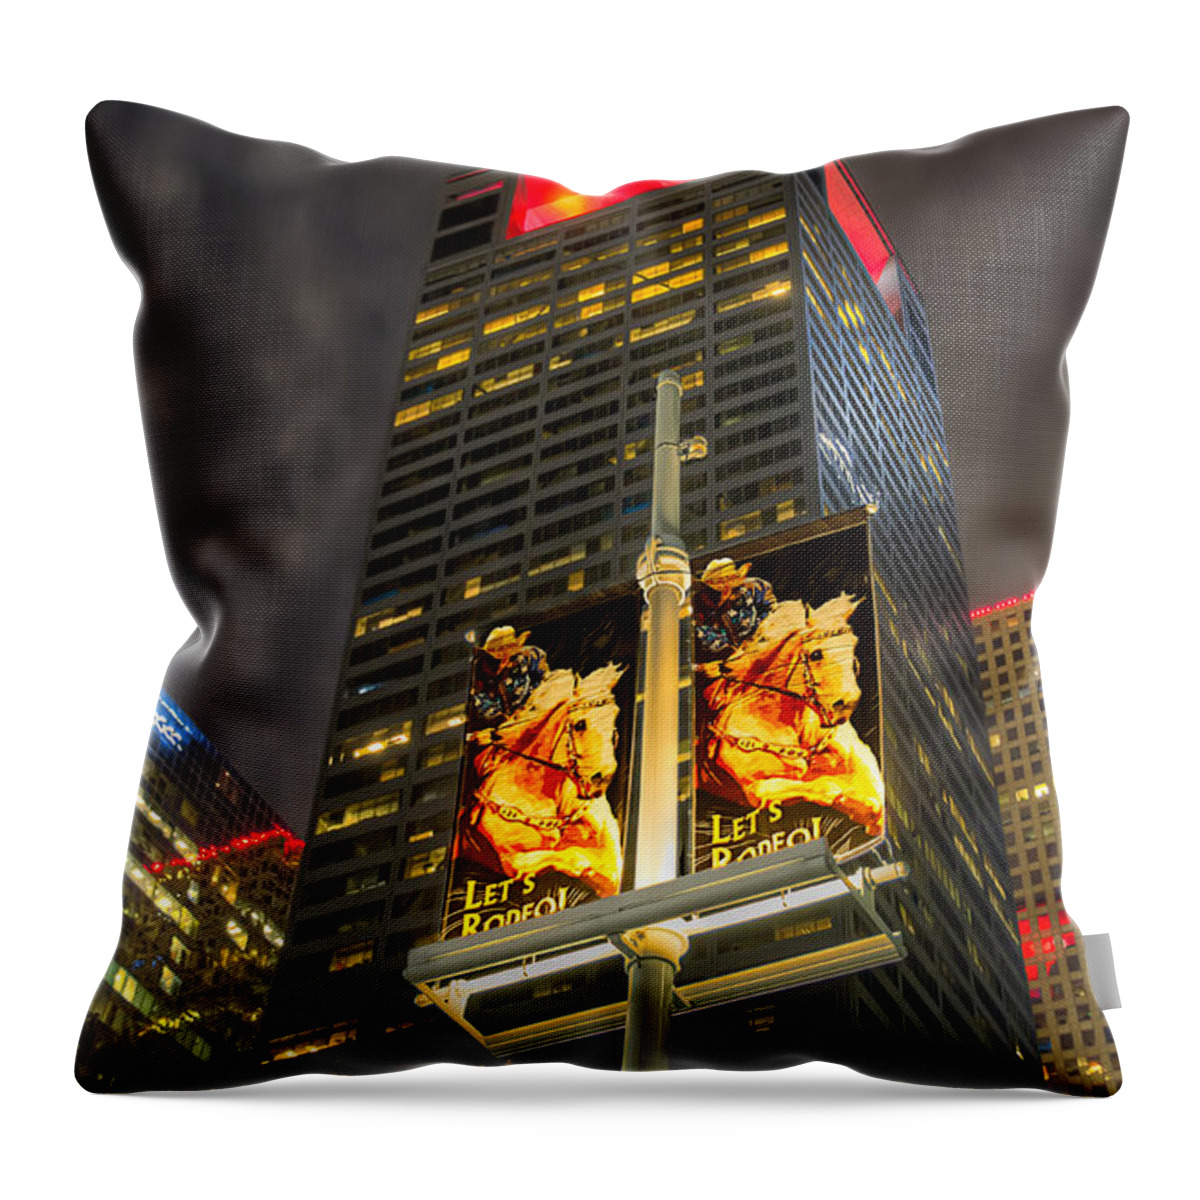 Downtown Throw Pillow featuring the photograph Let's Rodeo by Tim Stanley